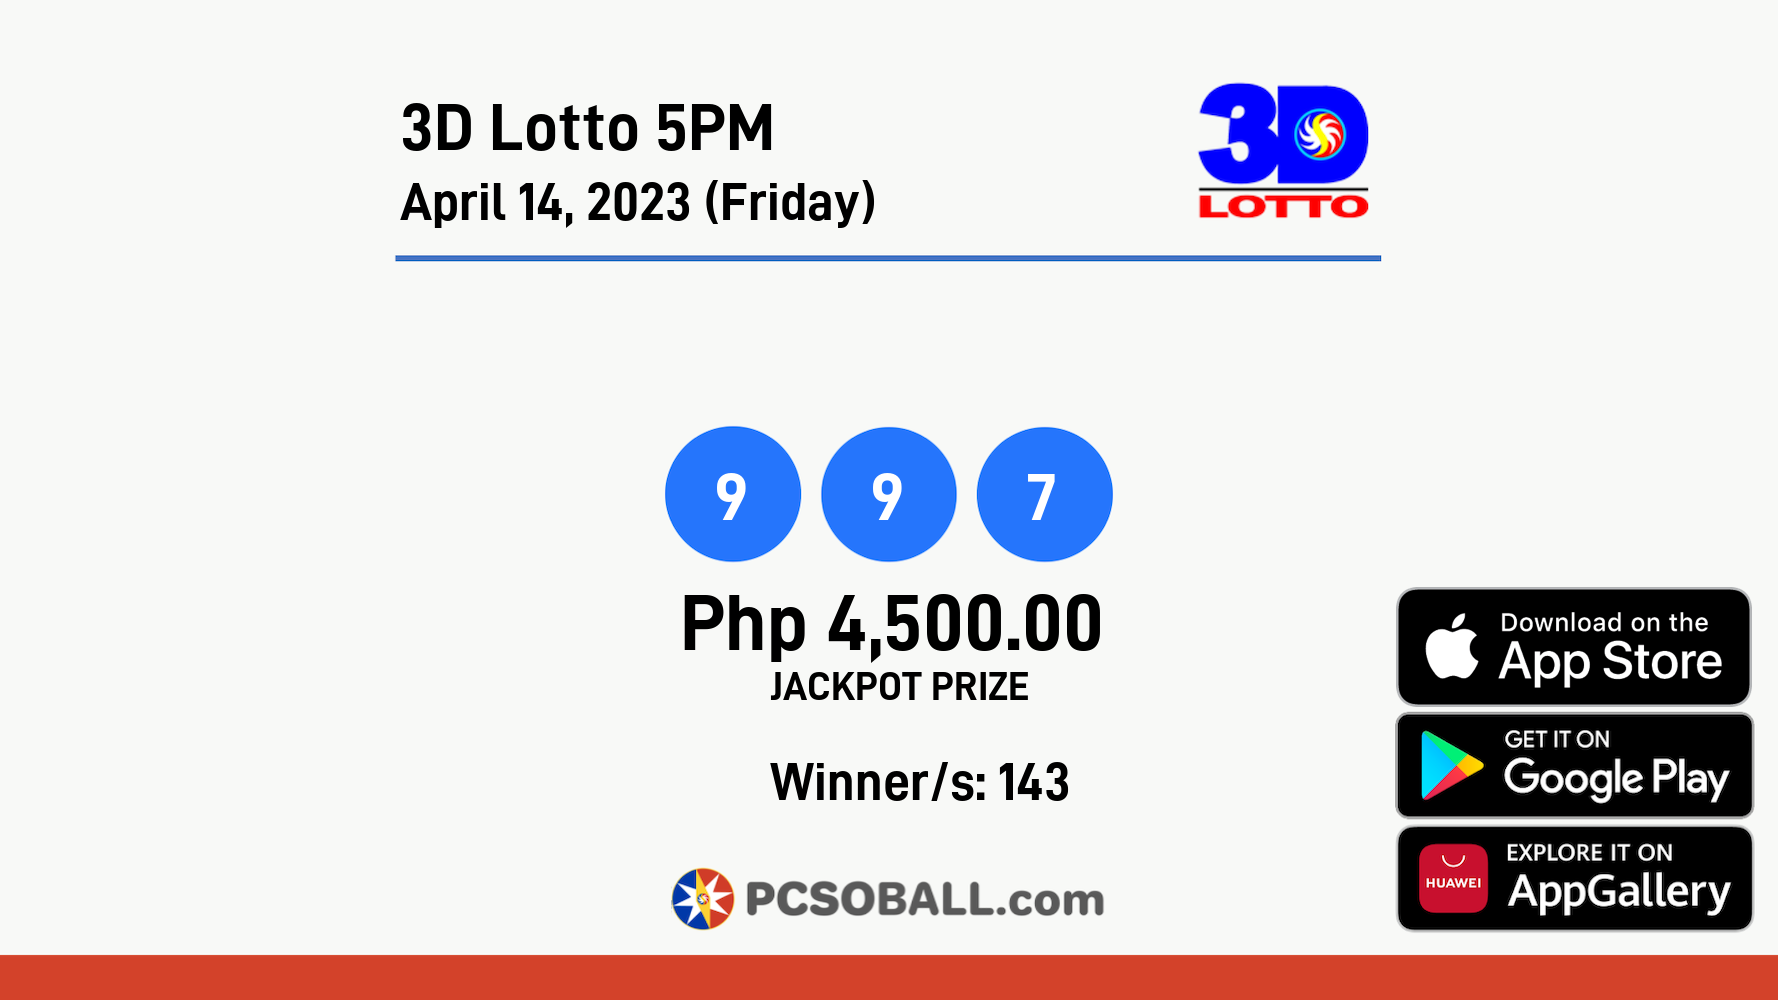 3D Lotto 5PM April 14, 2023 (Friday) Result